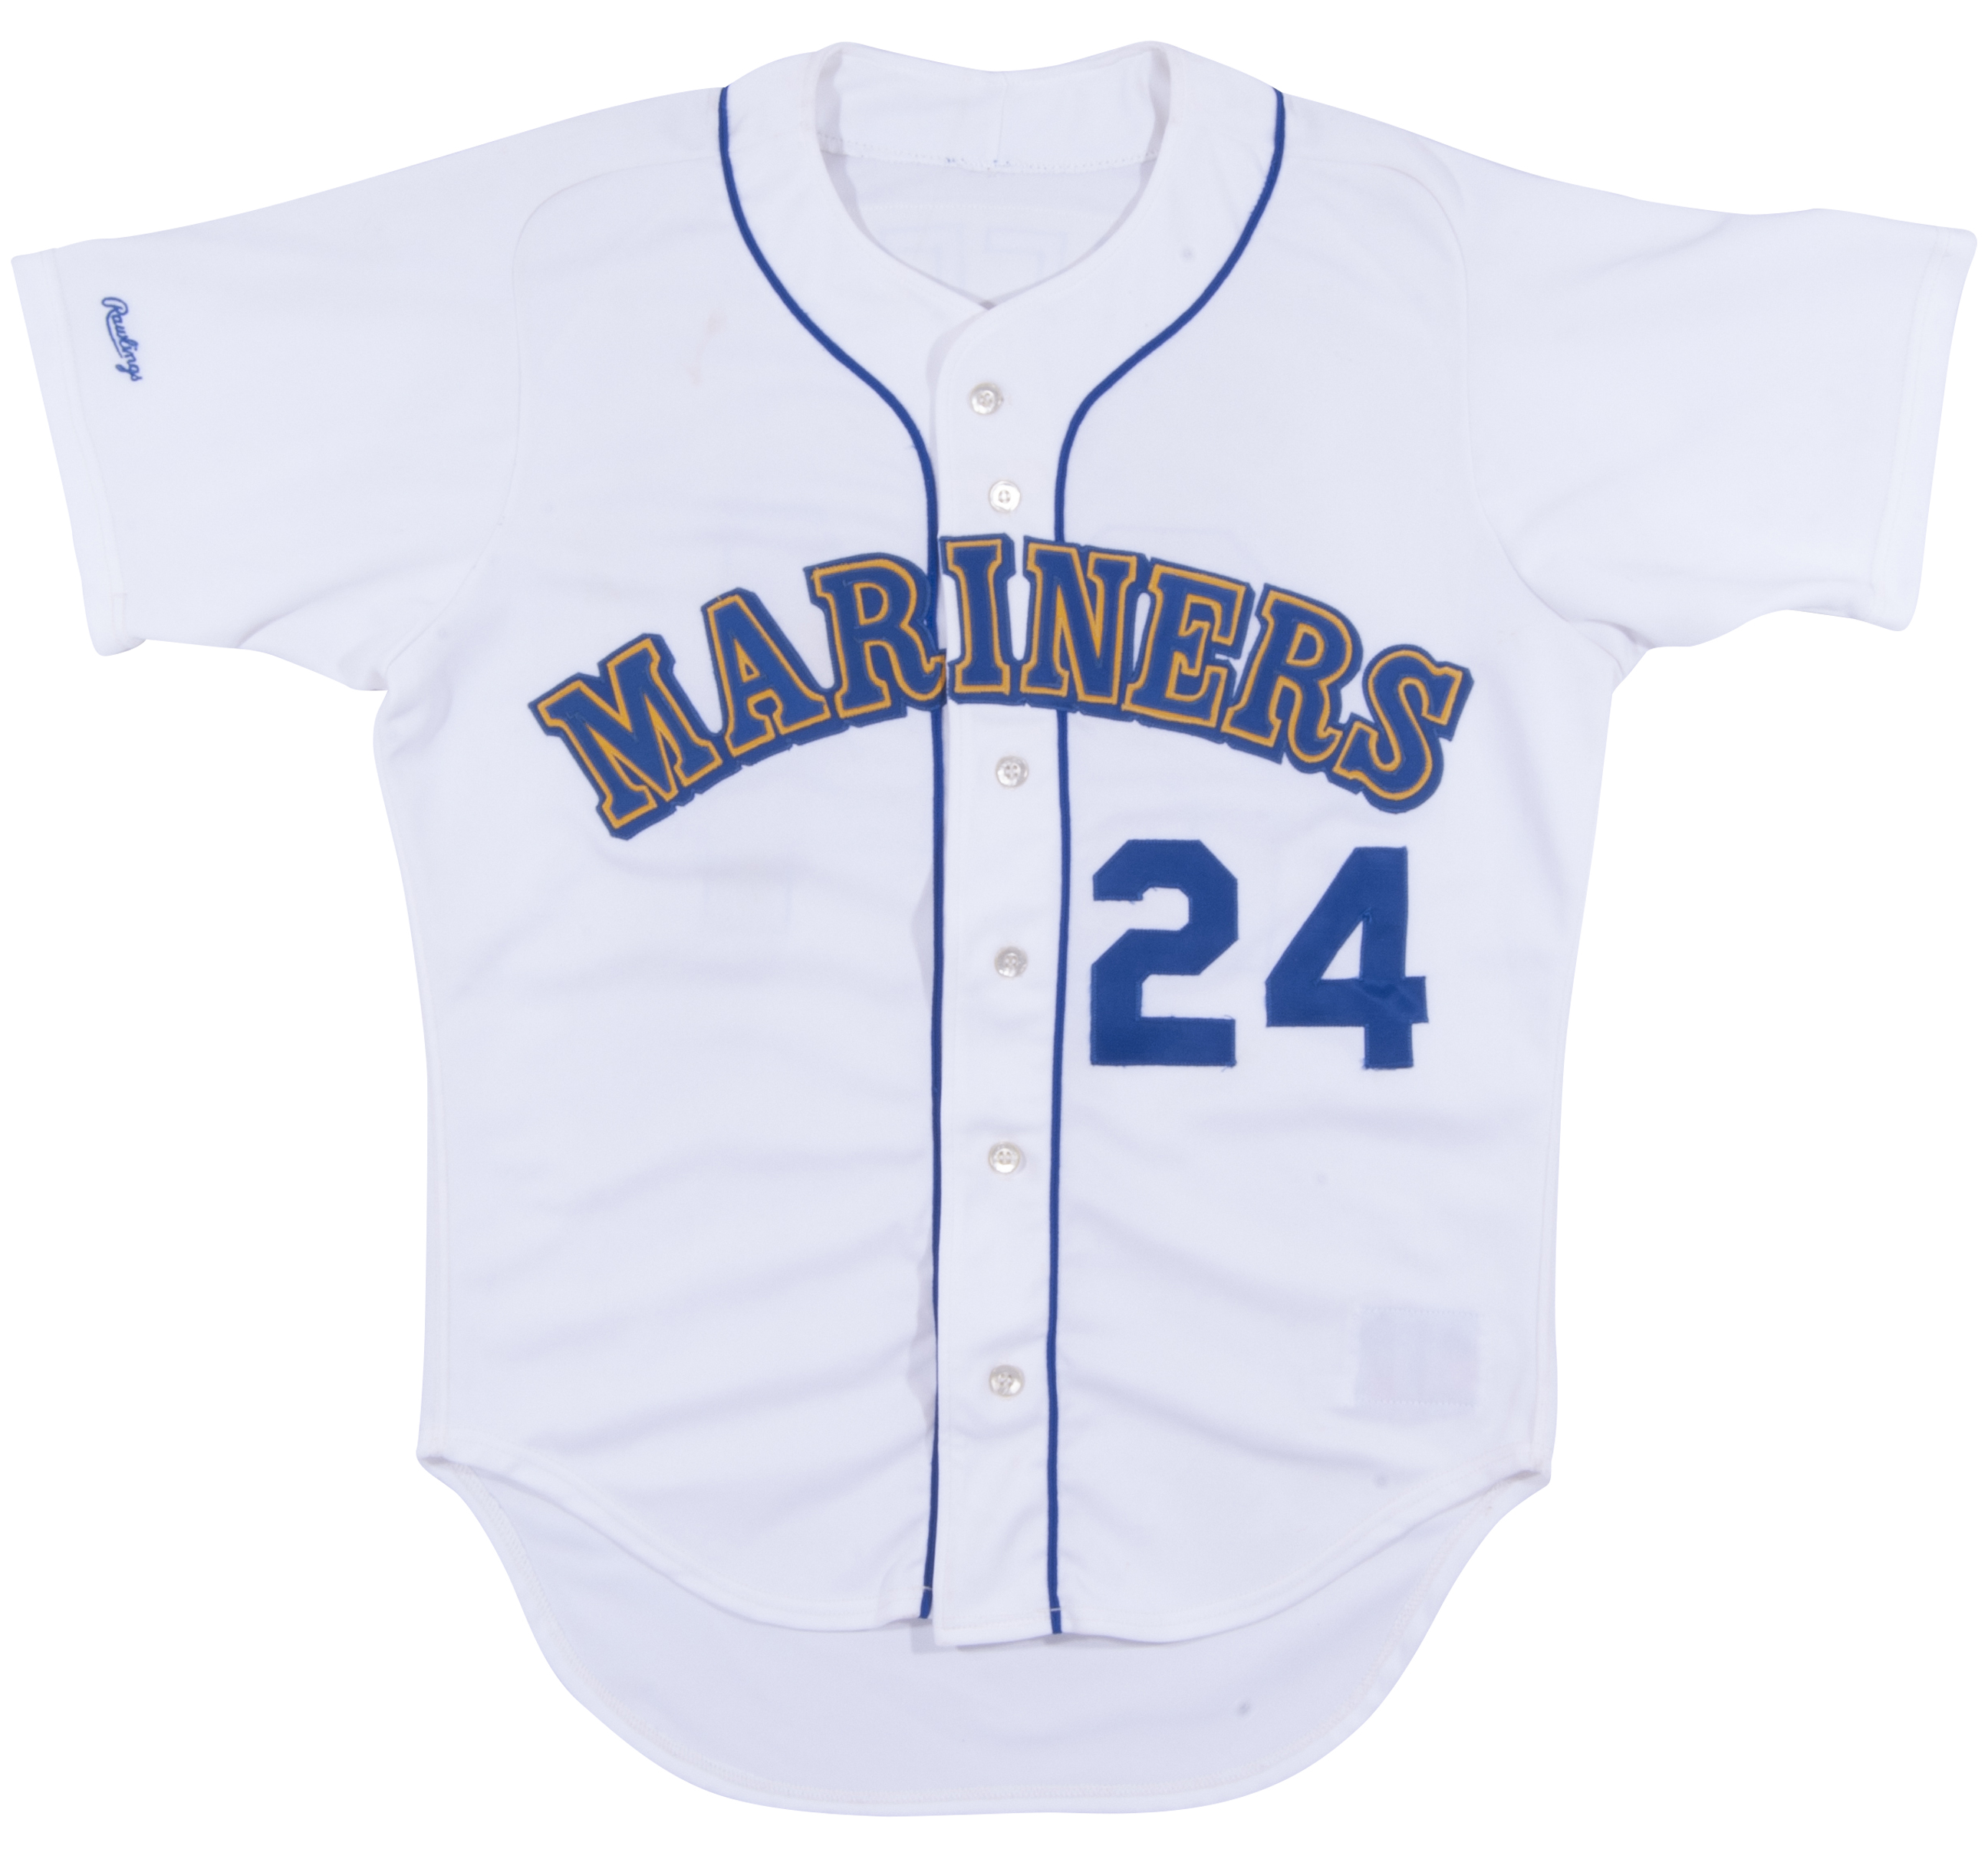 Mariners to Wear Ken Griffey Jr Patches In-Game – SportsLogos.Net News